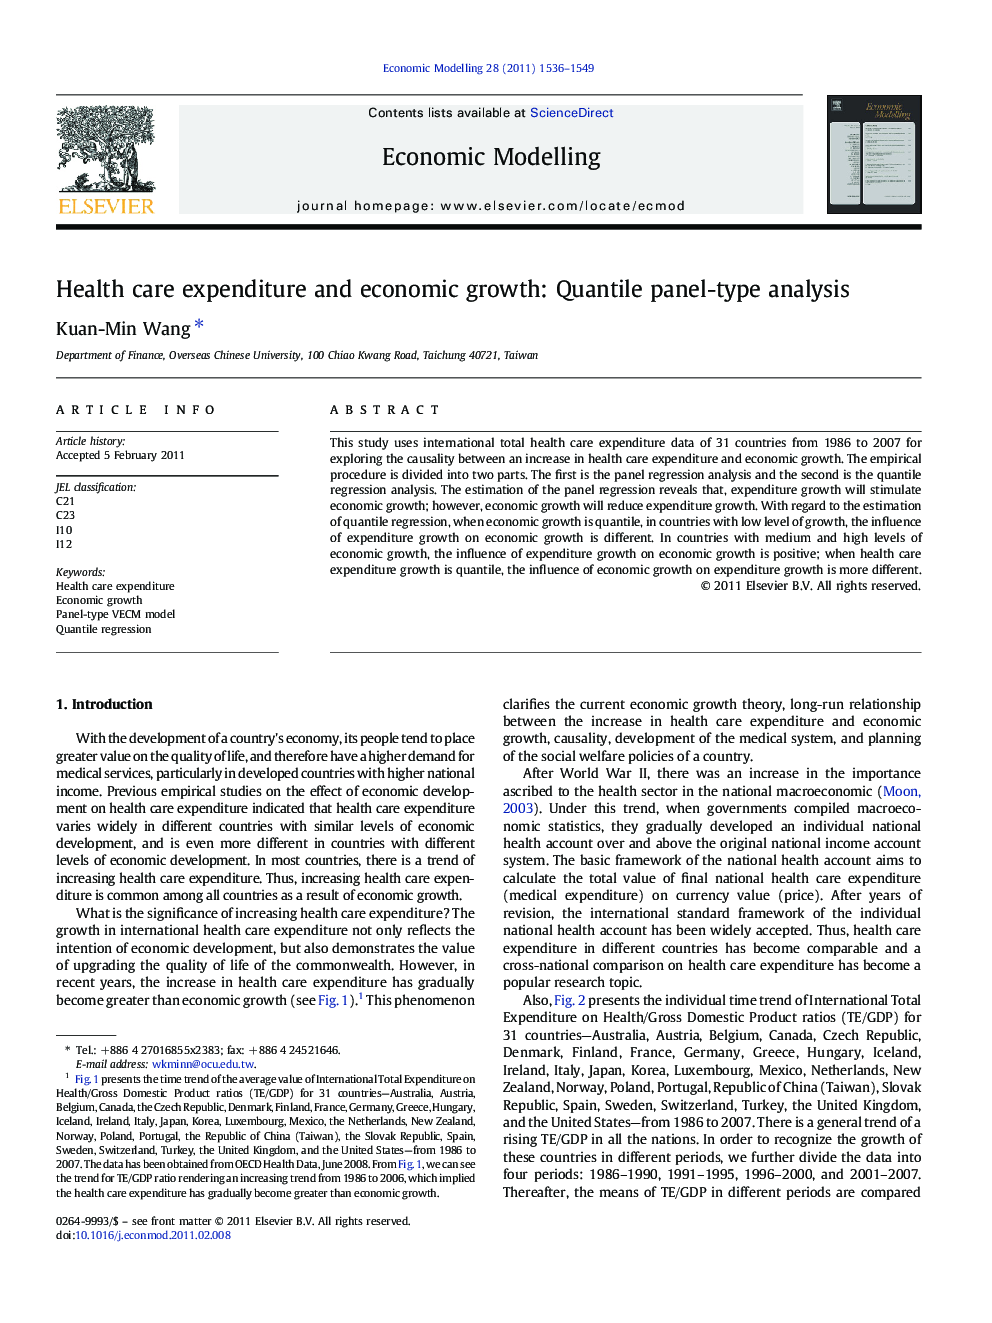 Health care expenditure and economic growth: Quantile panel-type analysis